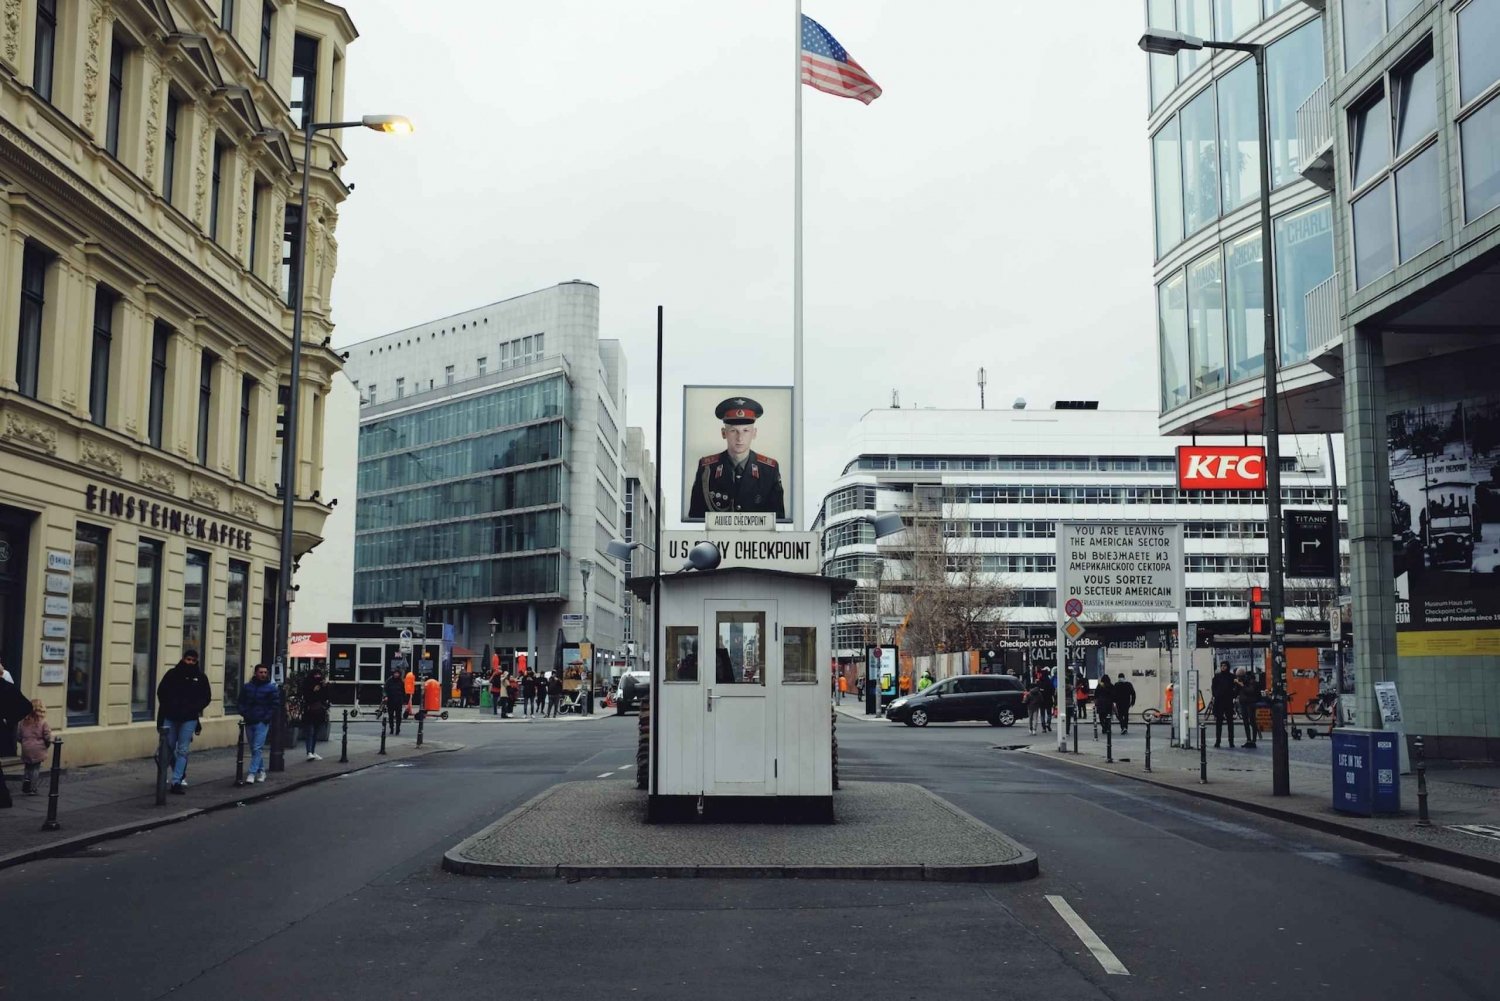 Berlin: Checkpoint Charlie Self-Guided Audio Tour